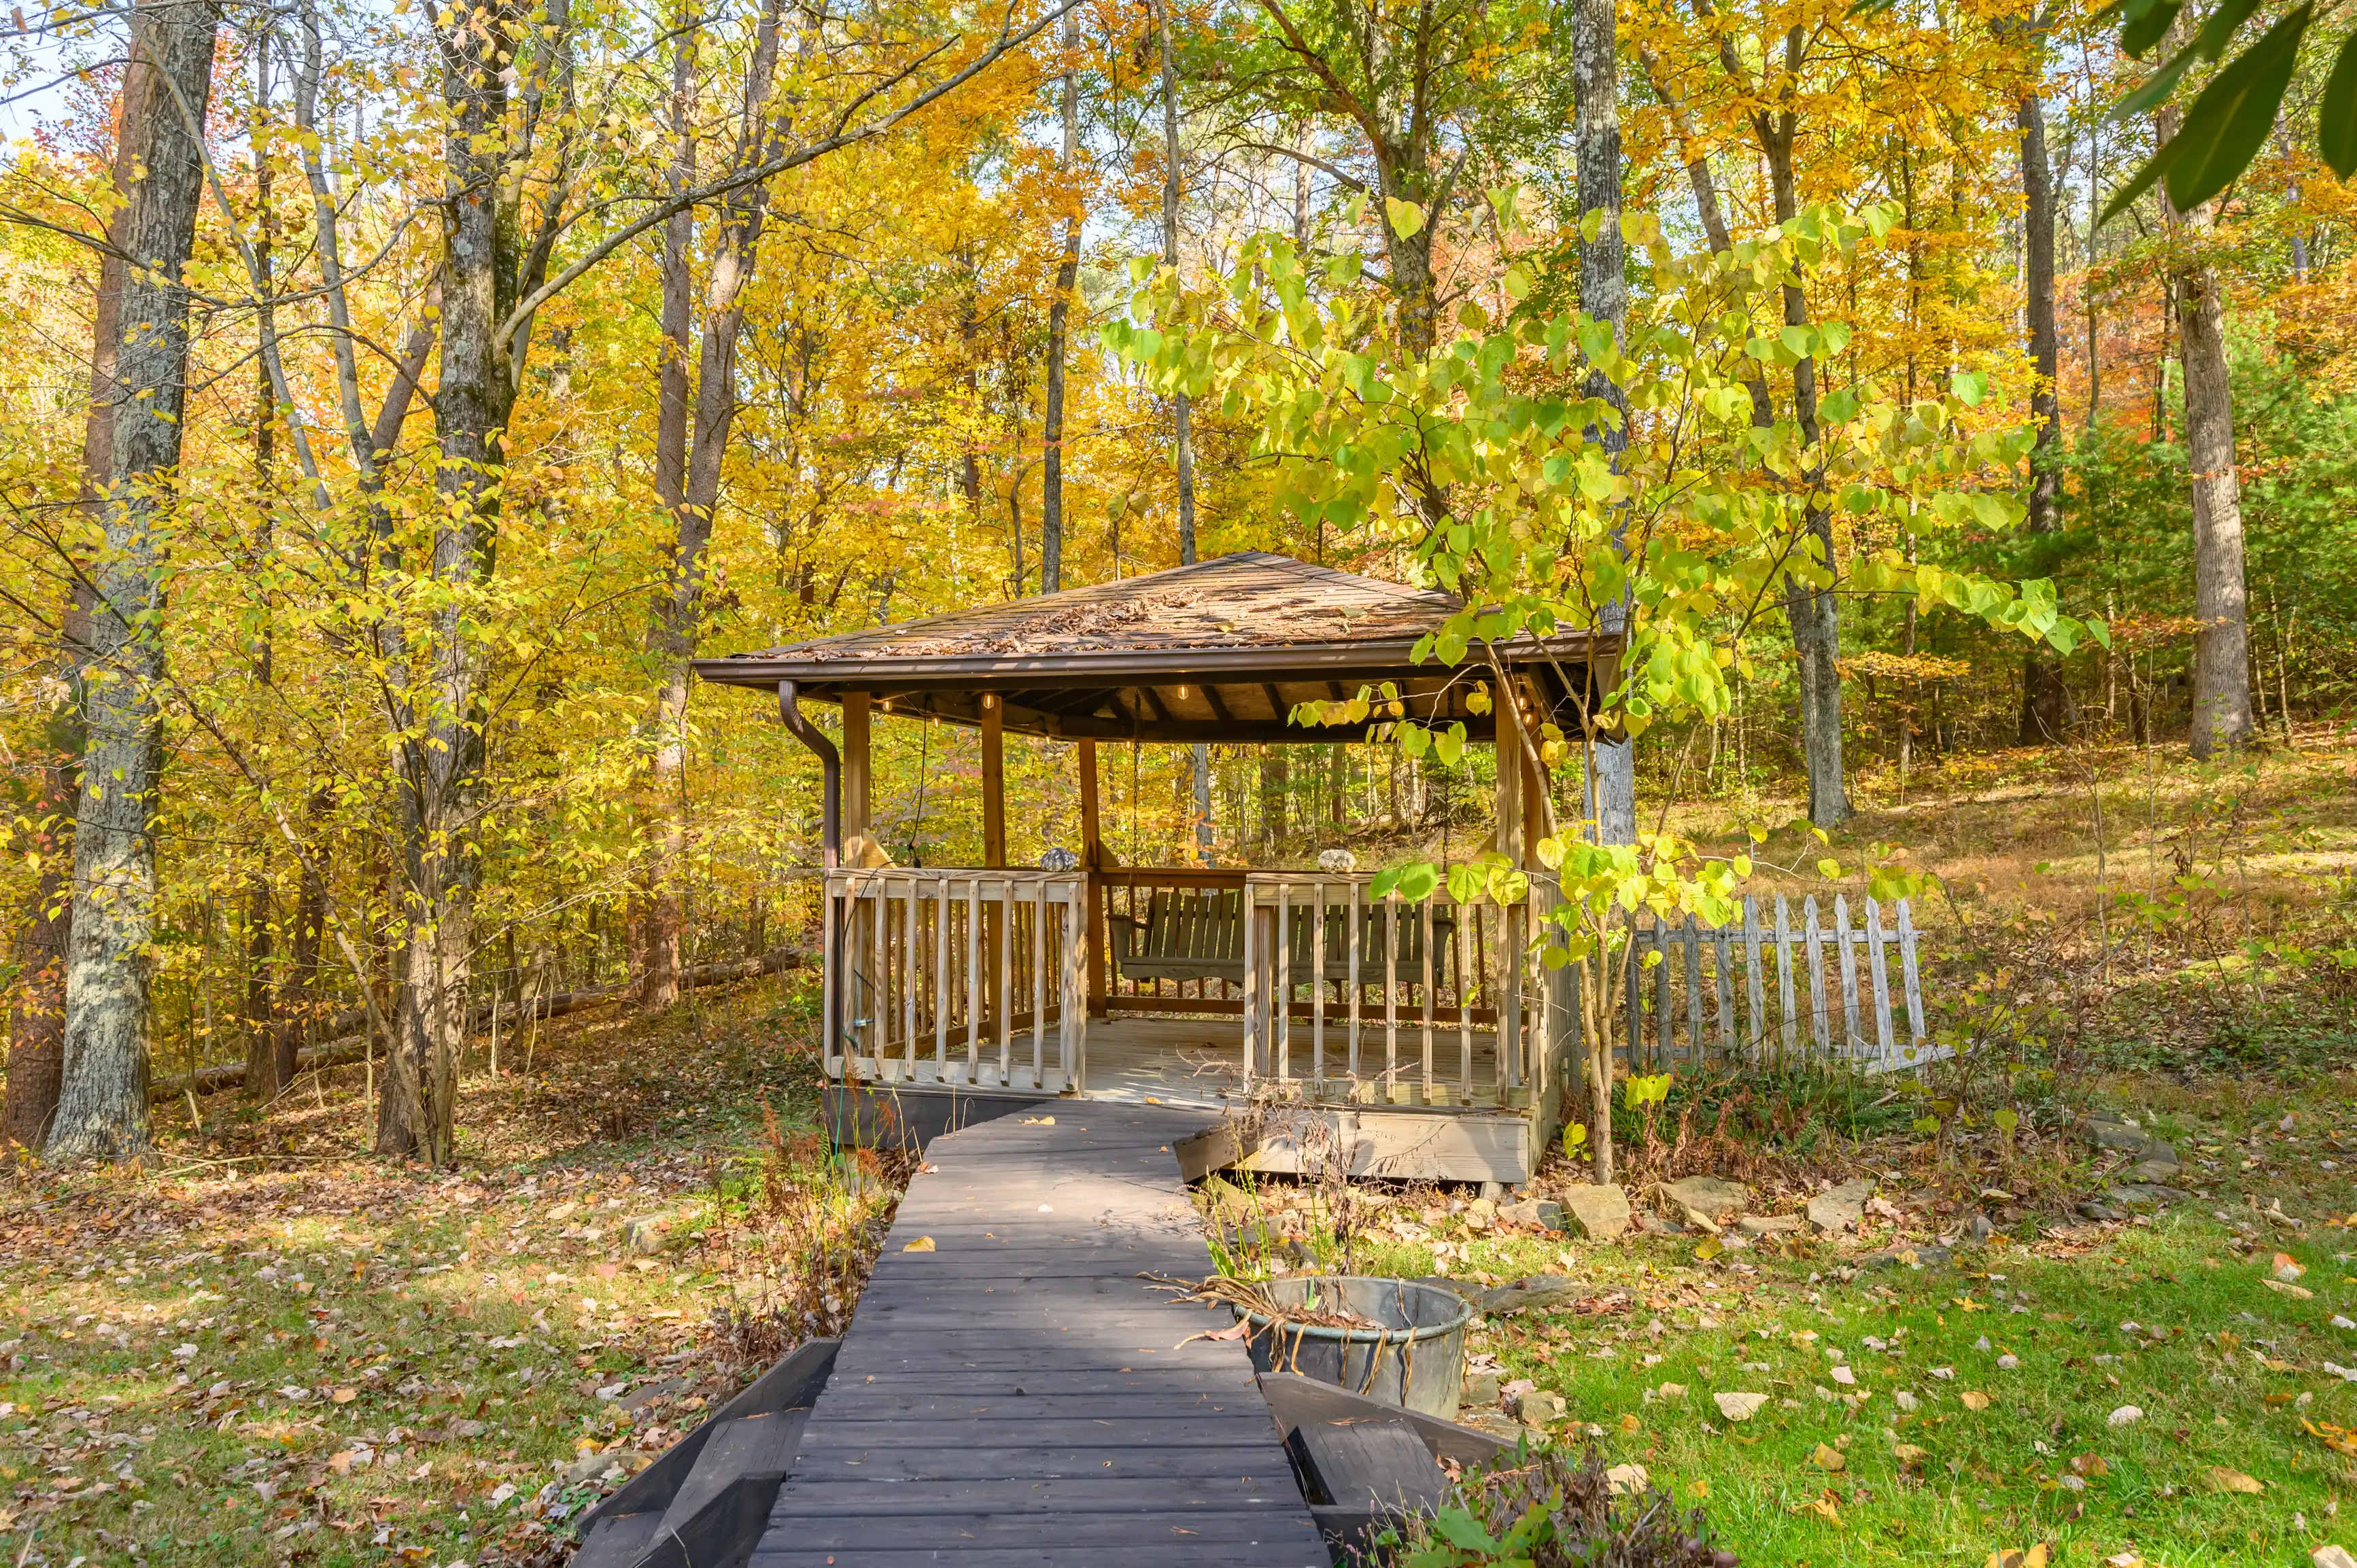 Wooden gazebo with a shingled roof at the end of a boardwalk surrounded by autumn-colored trees.